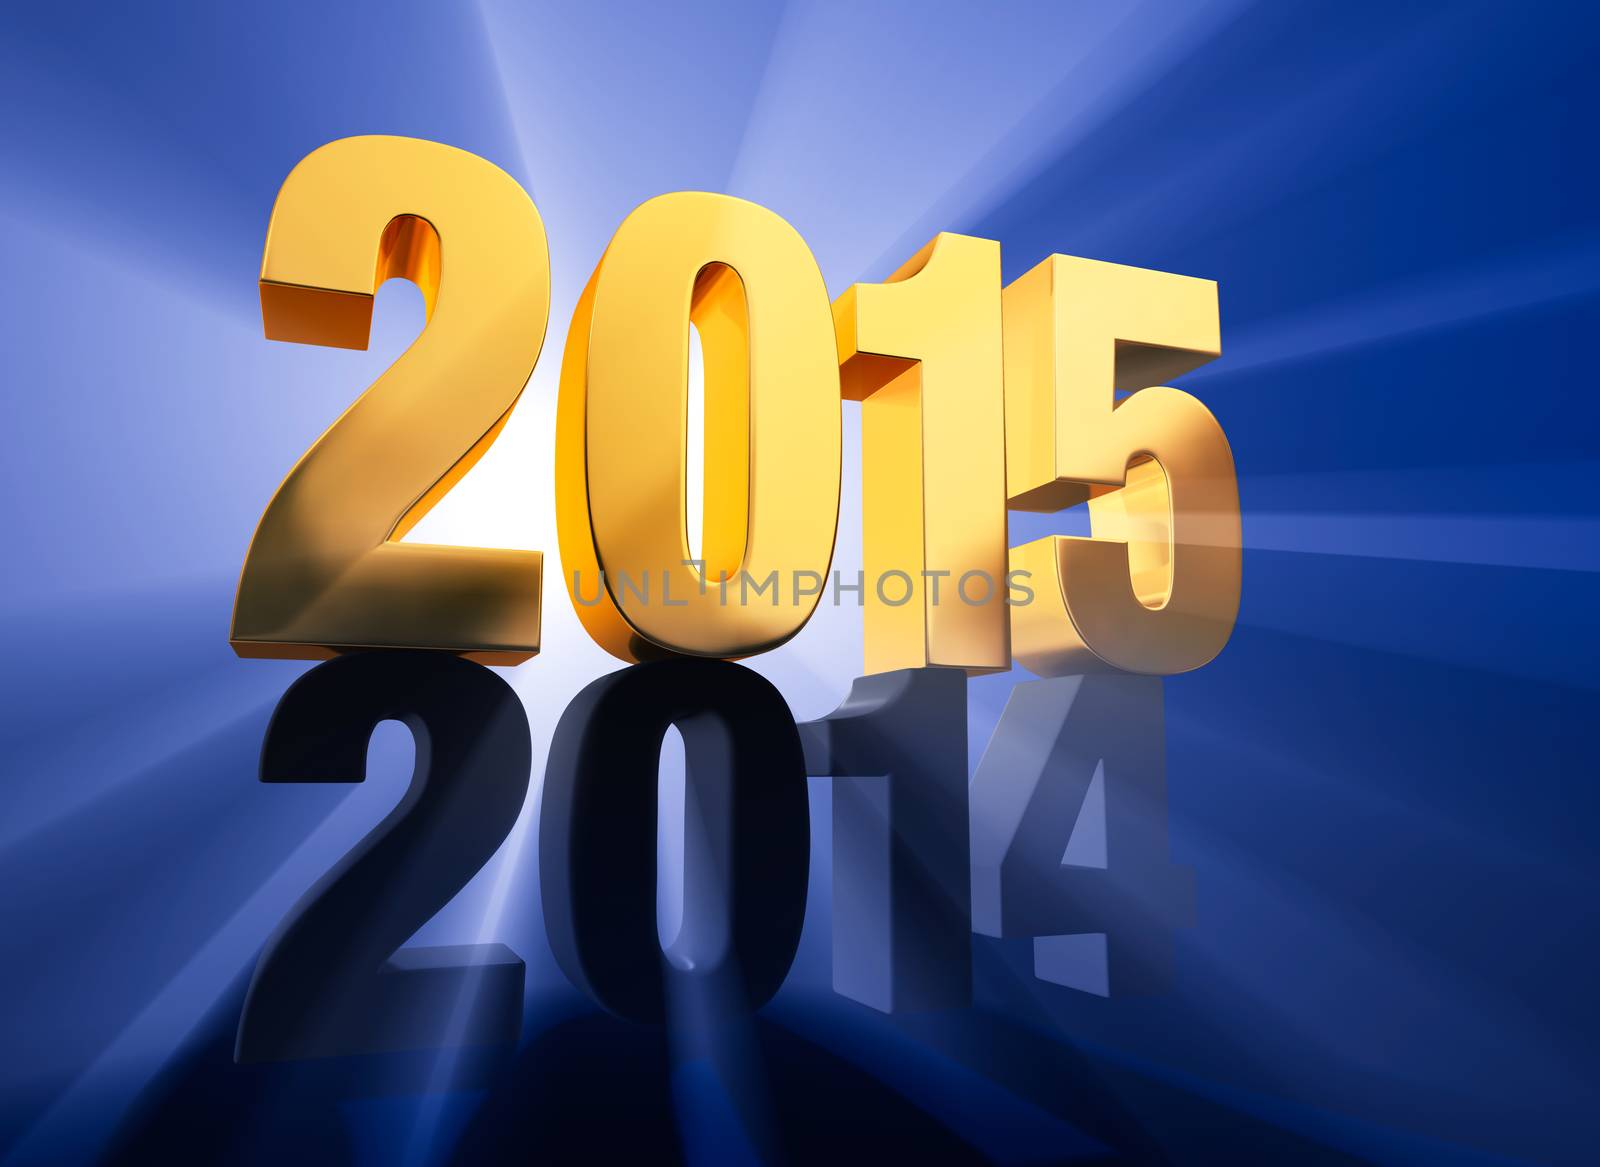 Forced perspective rendering of a brilliantly backlit, gold "2015" atop a dark gray "2014" on a deep blue background with light rays shining through both years. 
